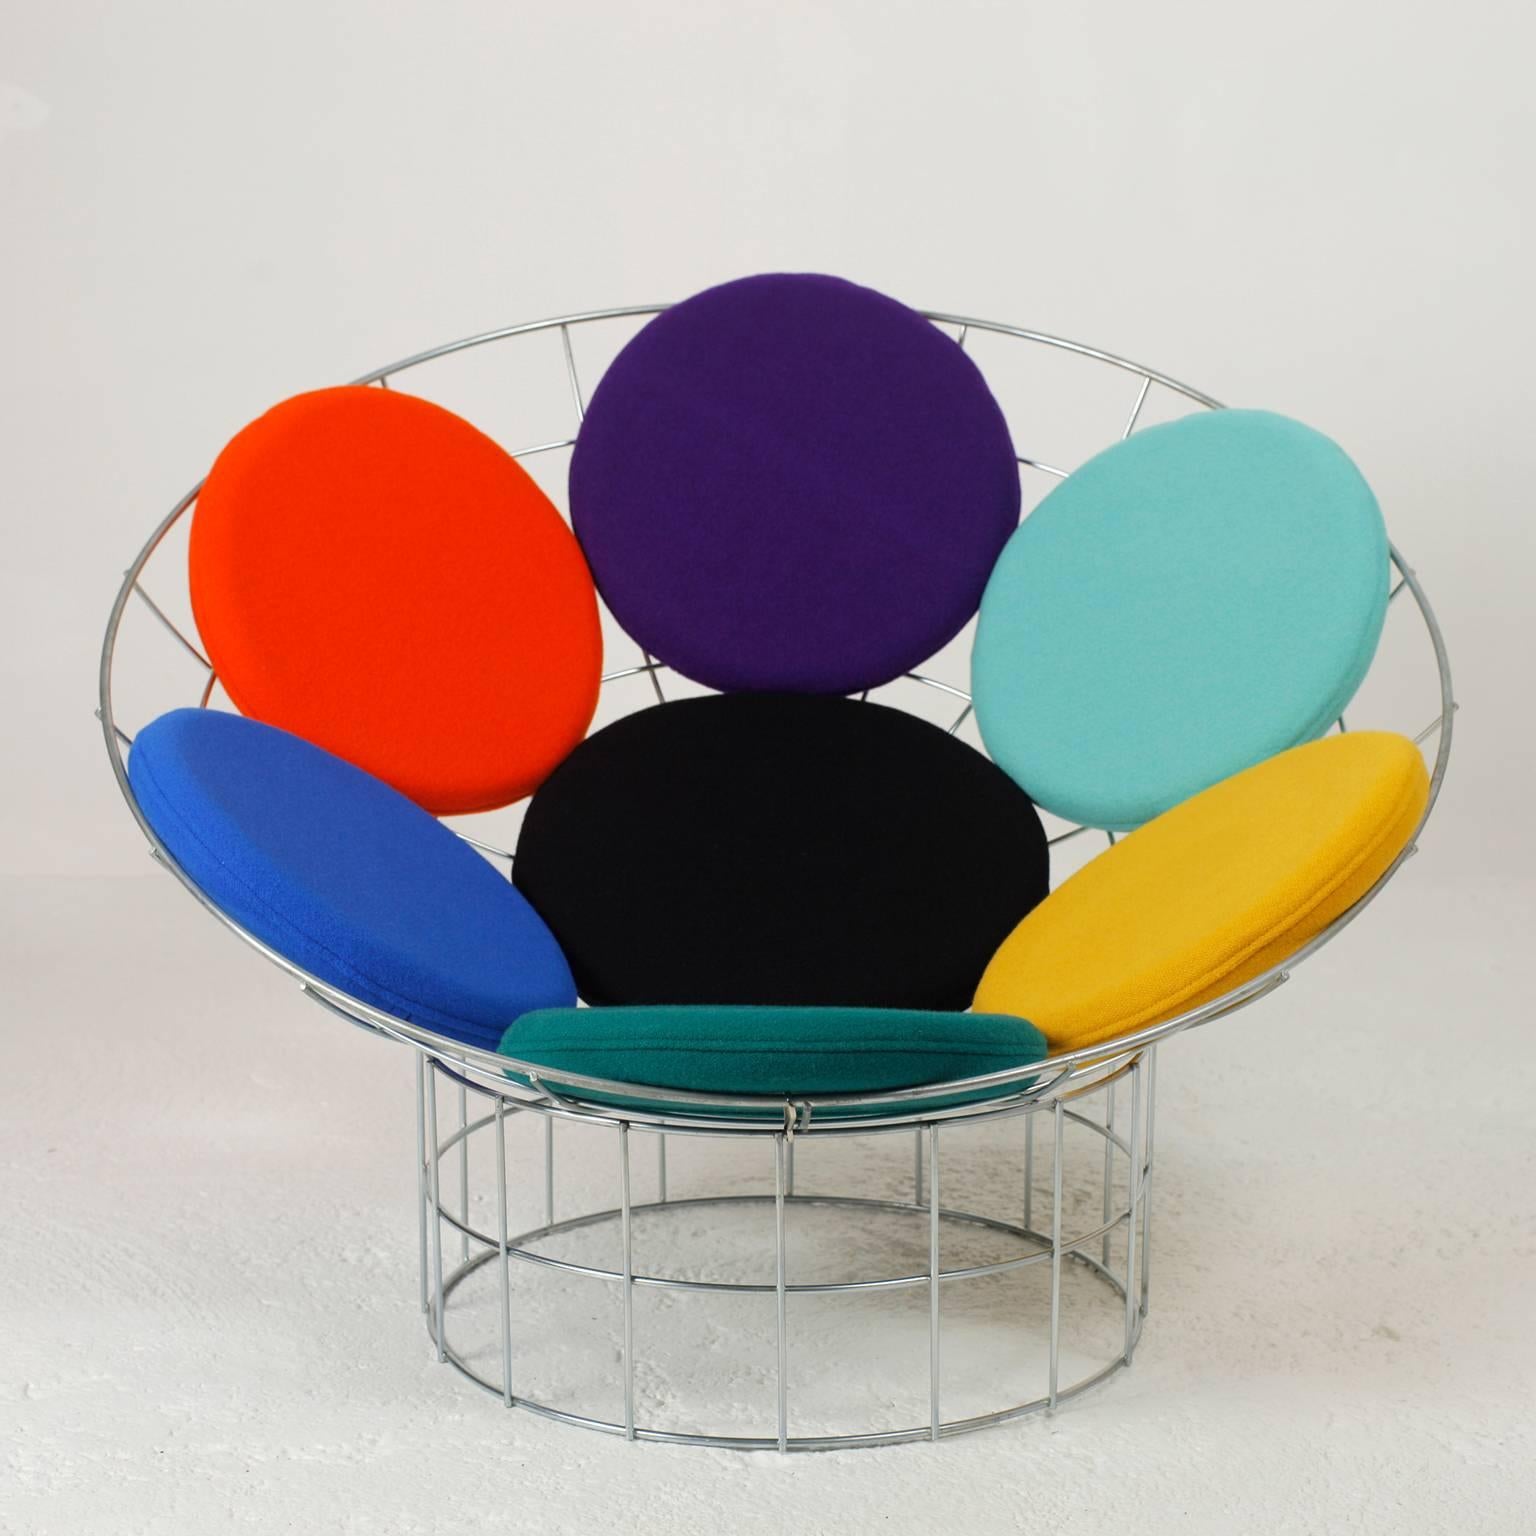 Iconic peacock chair by Verner Panton.
Very pop lounge chair.
Collection piece.
This reissue from Habitat dates from 1980s, they were reissued in limited numbers and discontinued in less than a year. No more manufactured today.
The cushions are